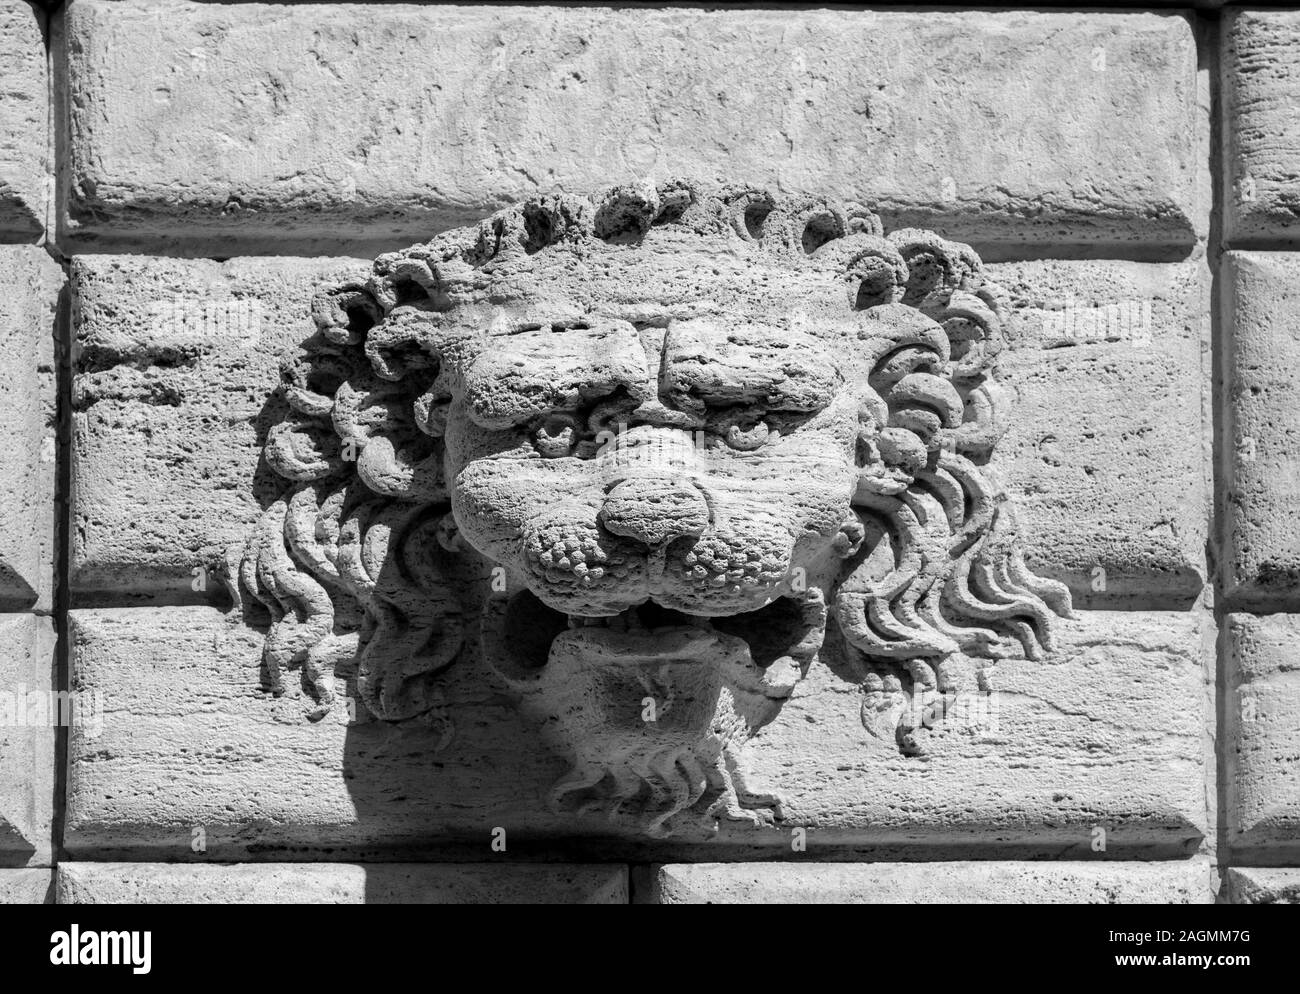 The lion - a symbol of strength and bravery - is represented in many towns of Tuscany subjugated by Florence. Here on a low-relief in Montepulciano. Stock Photo